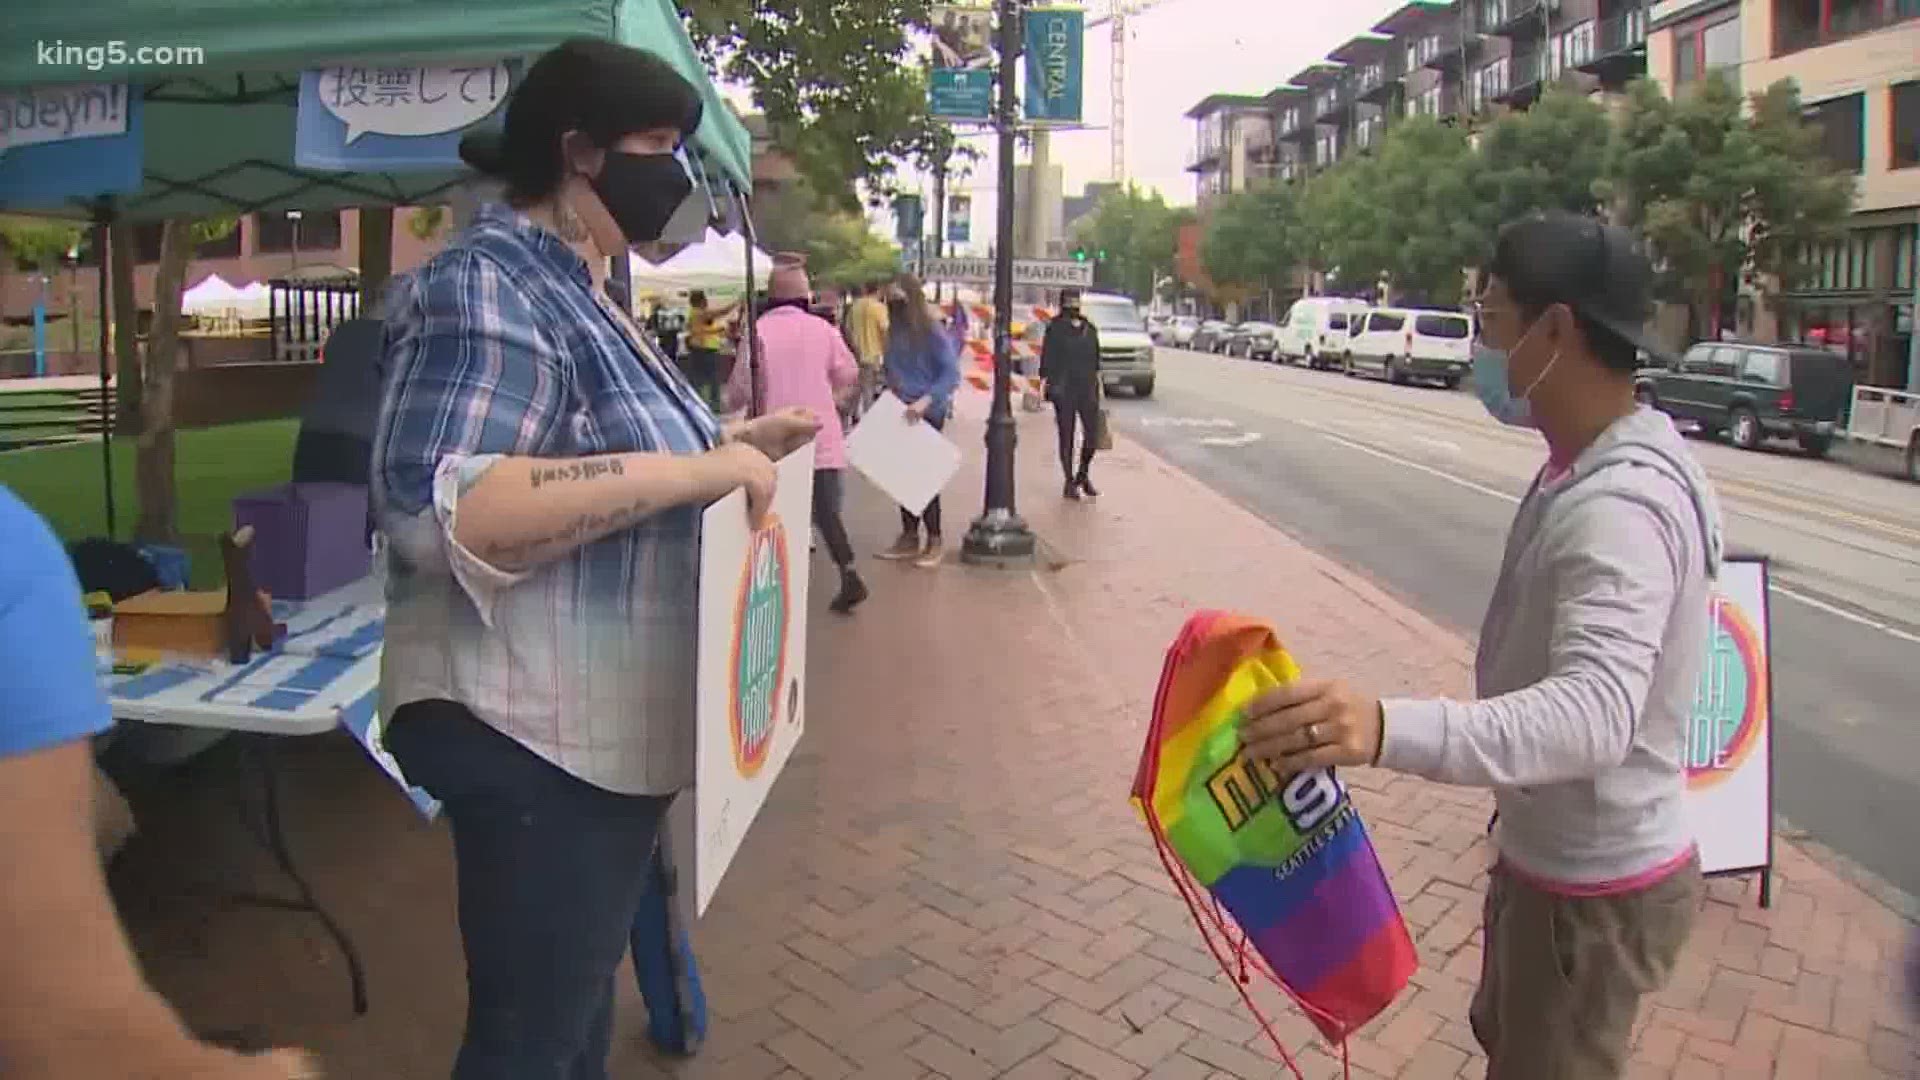 Seattle Pride is holding a voter registration event to encourage LGBTQIA+ and Black, Brown and Indigenous communities to register before the upcoming election.